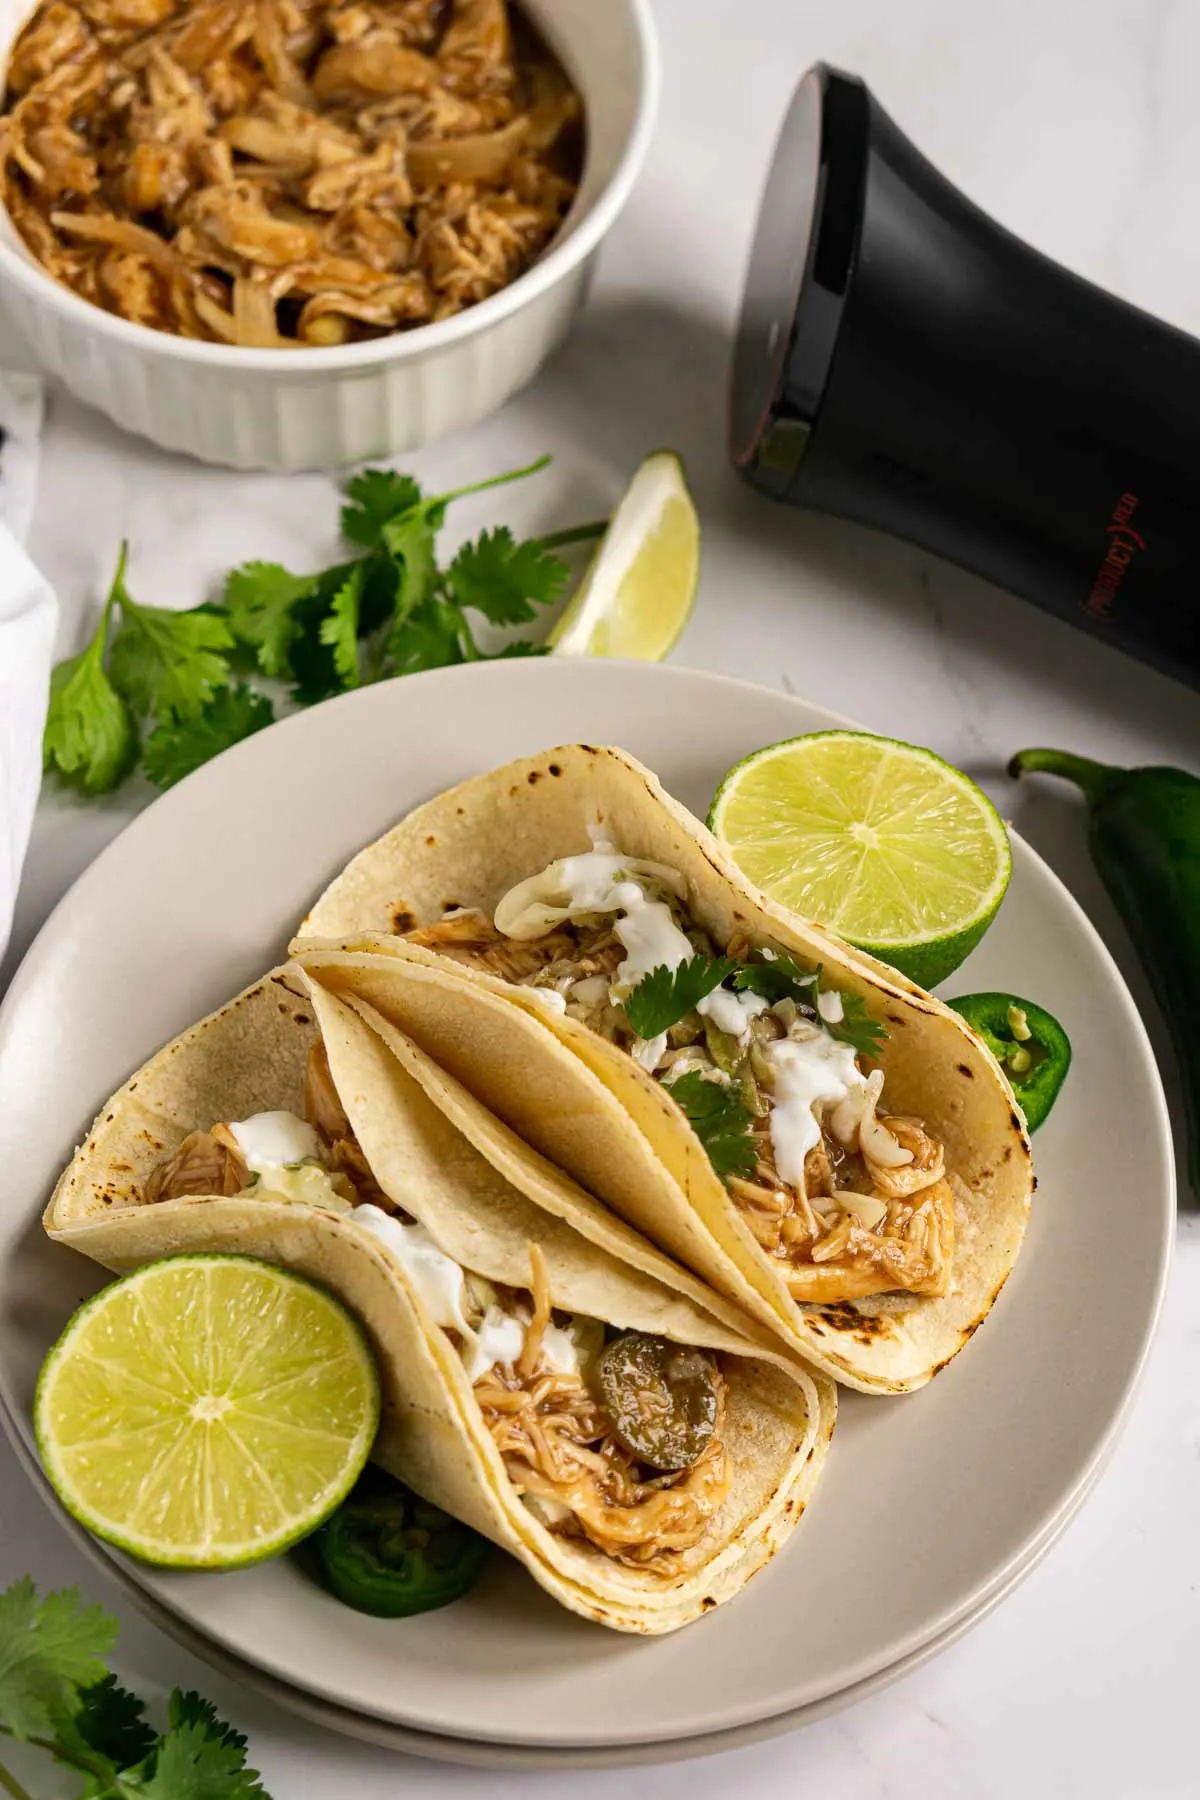 Shredded chicken tacos on a plate next to sous vide cooker